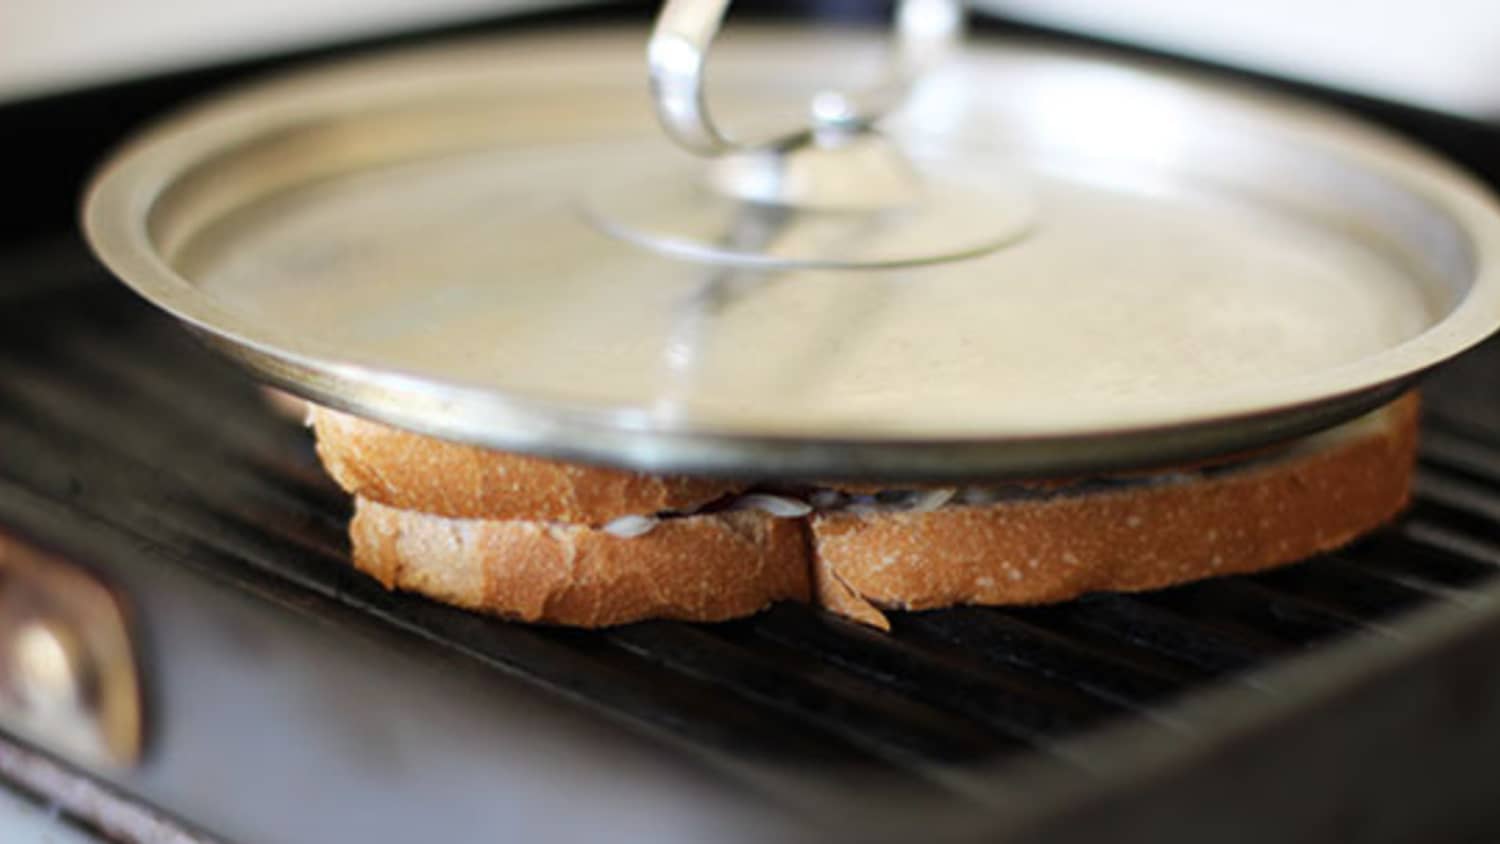 Amazing Things You Didn't Know You Could Make In A Panini Press